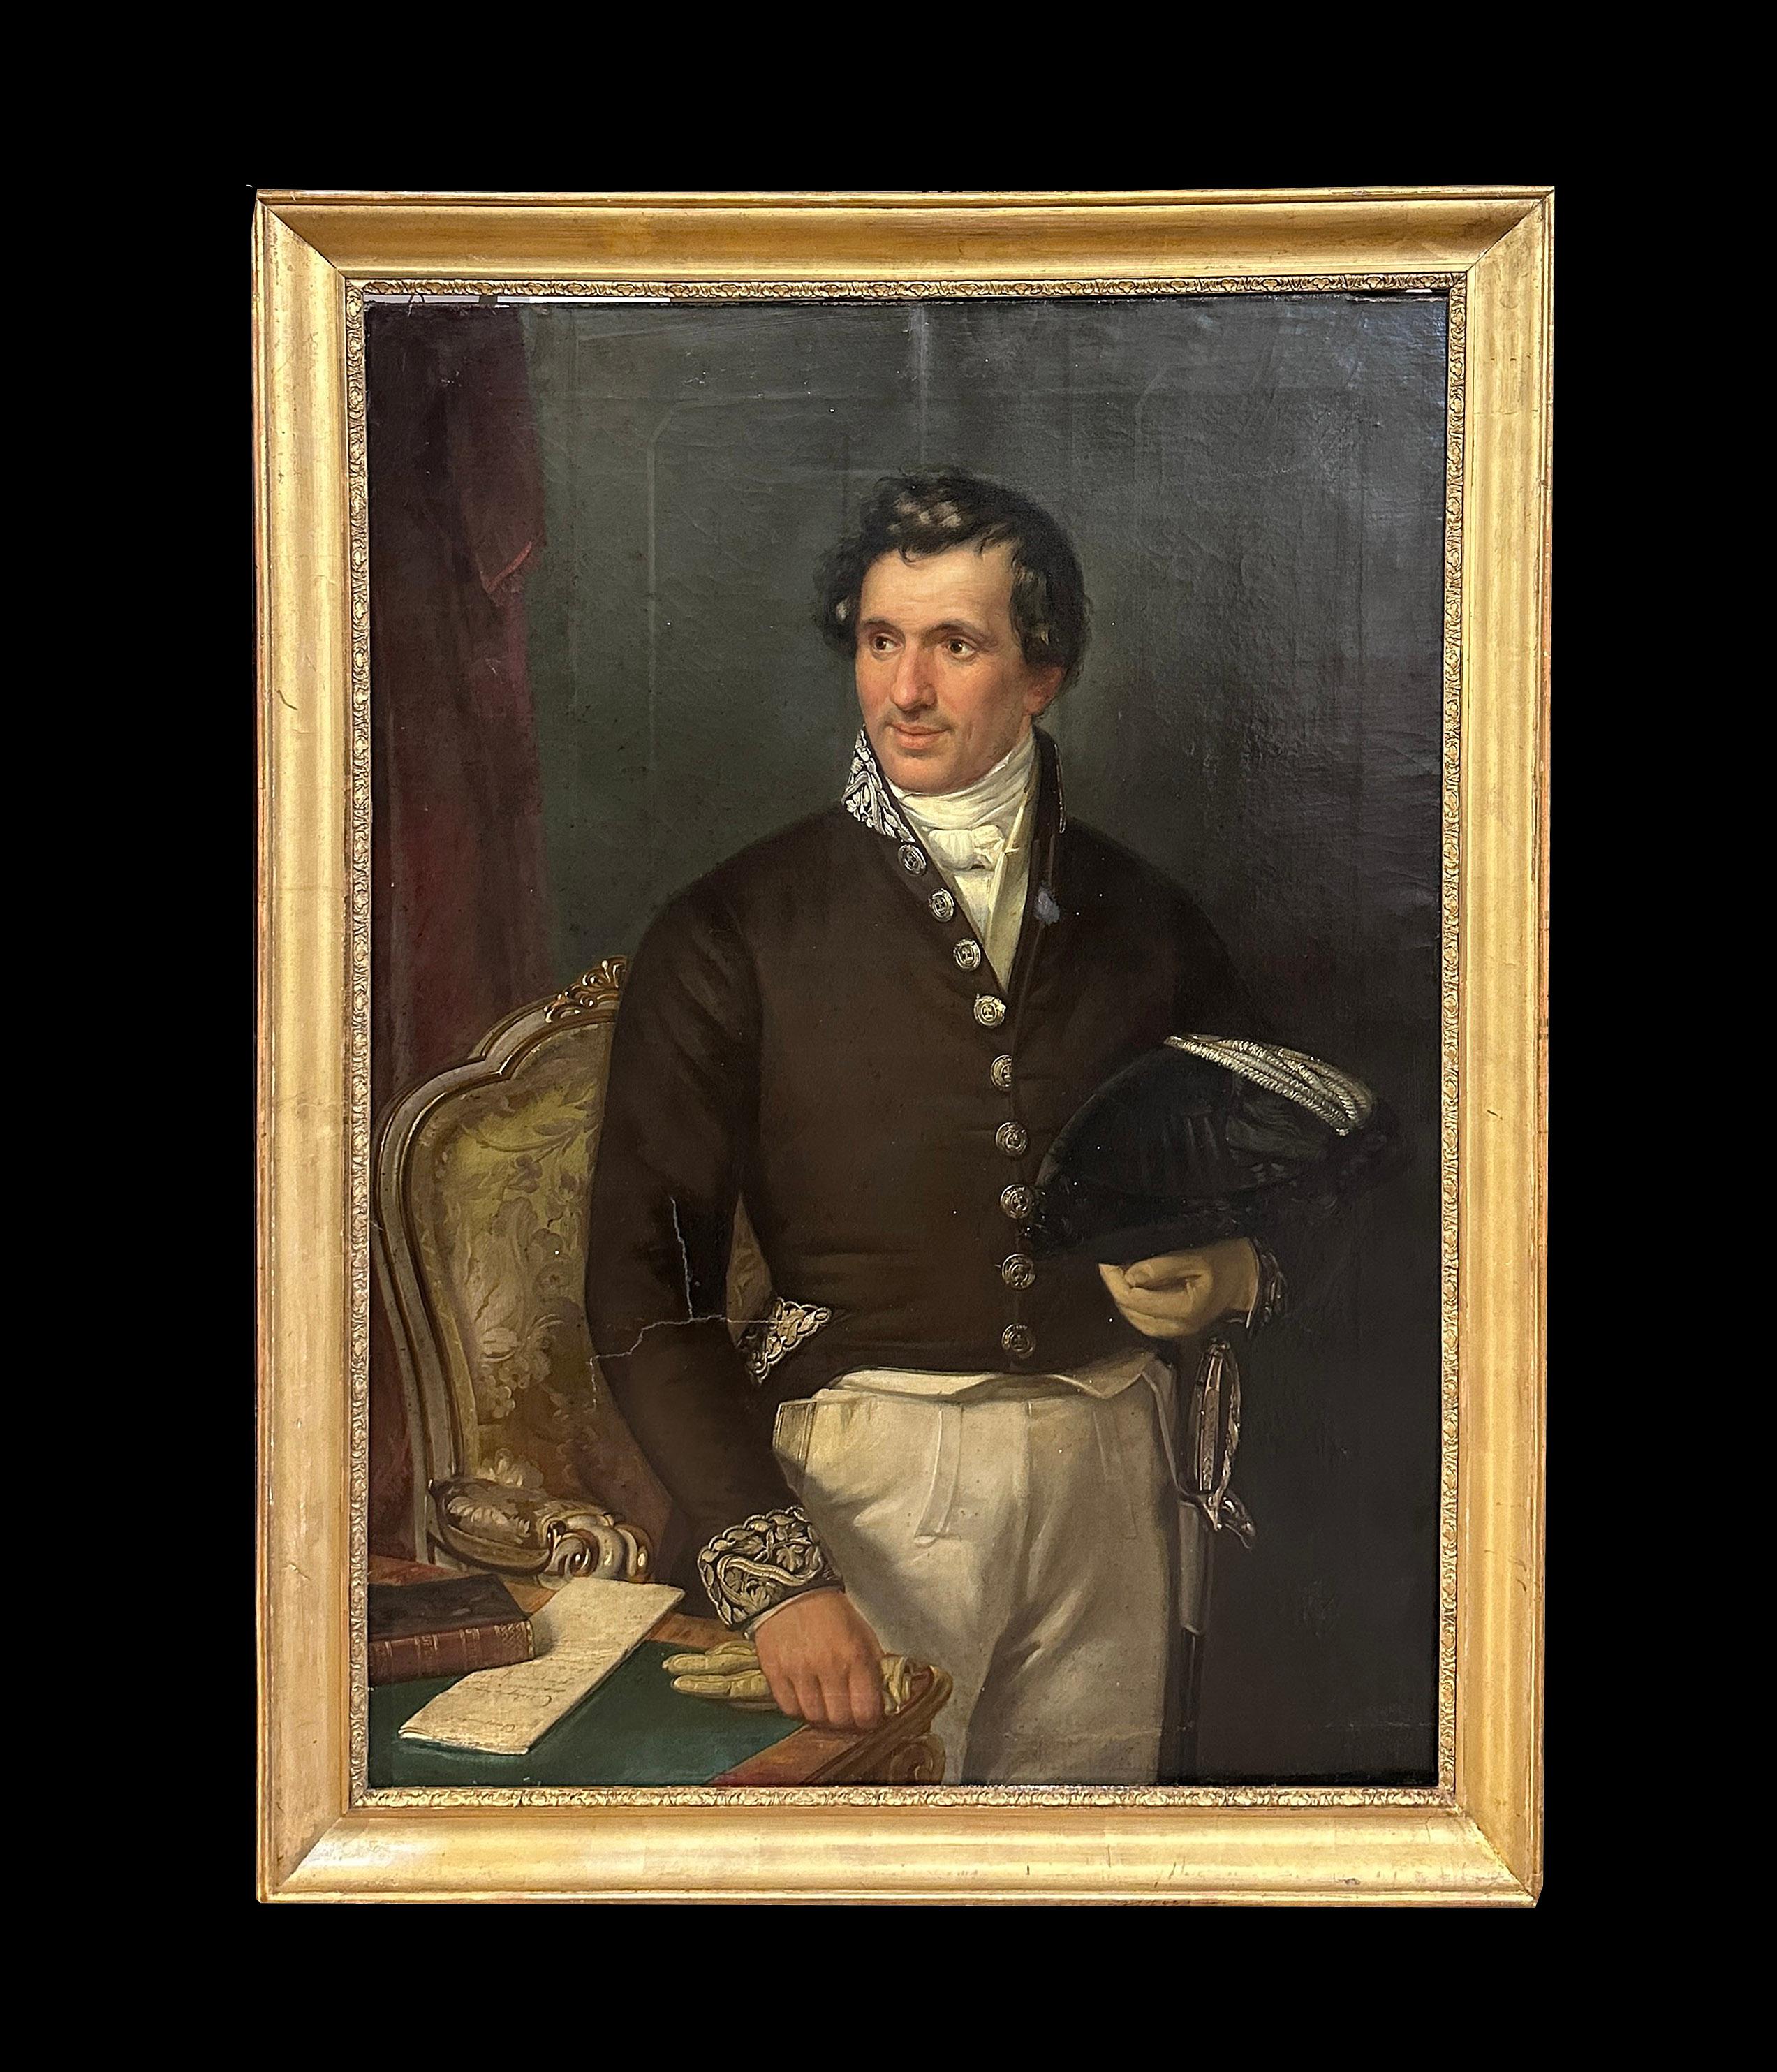 Splendid oil portrait on canvas of a gentleman in uniform, identified as Professor Moses Bosisio, mayor of Monza, who died in 1846, as reported on a plaque on the back of the painting. The Bosisio family was one of the most important and noble in